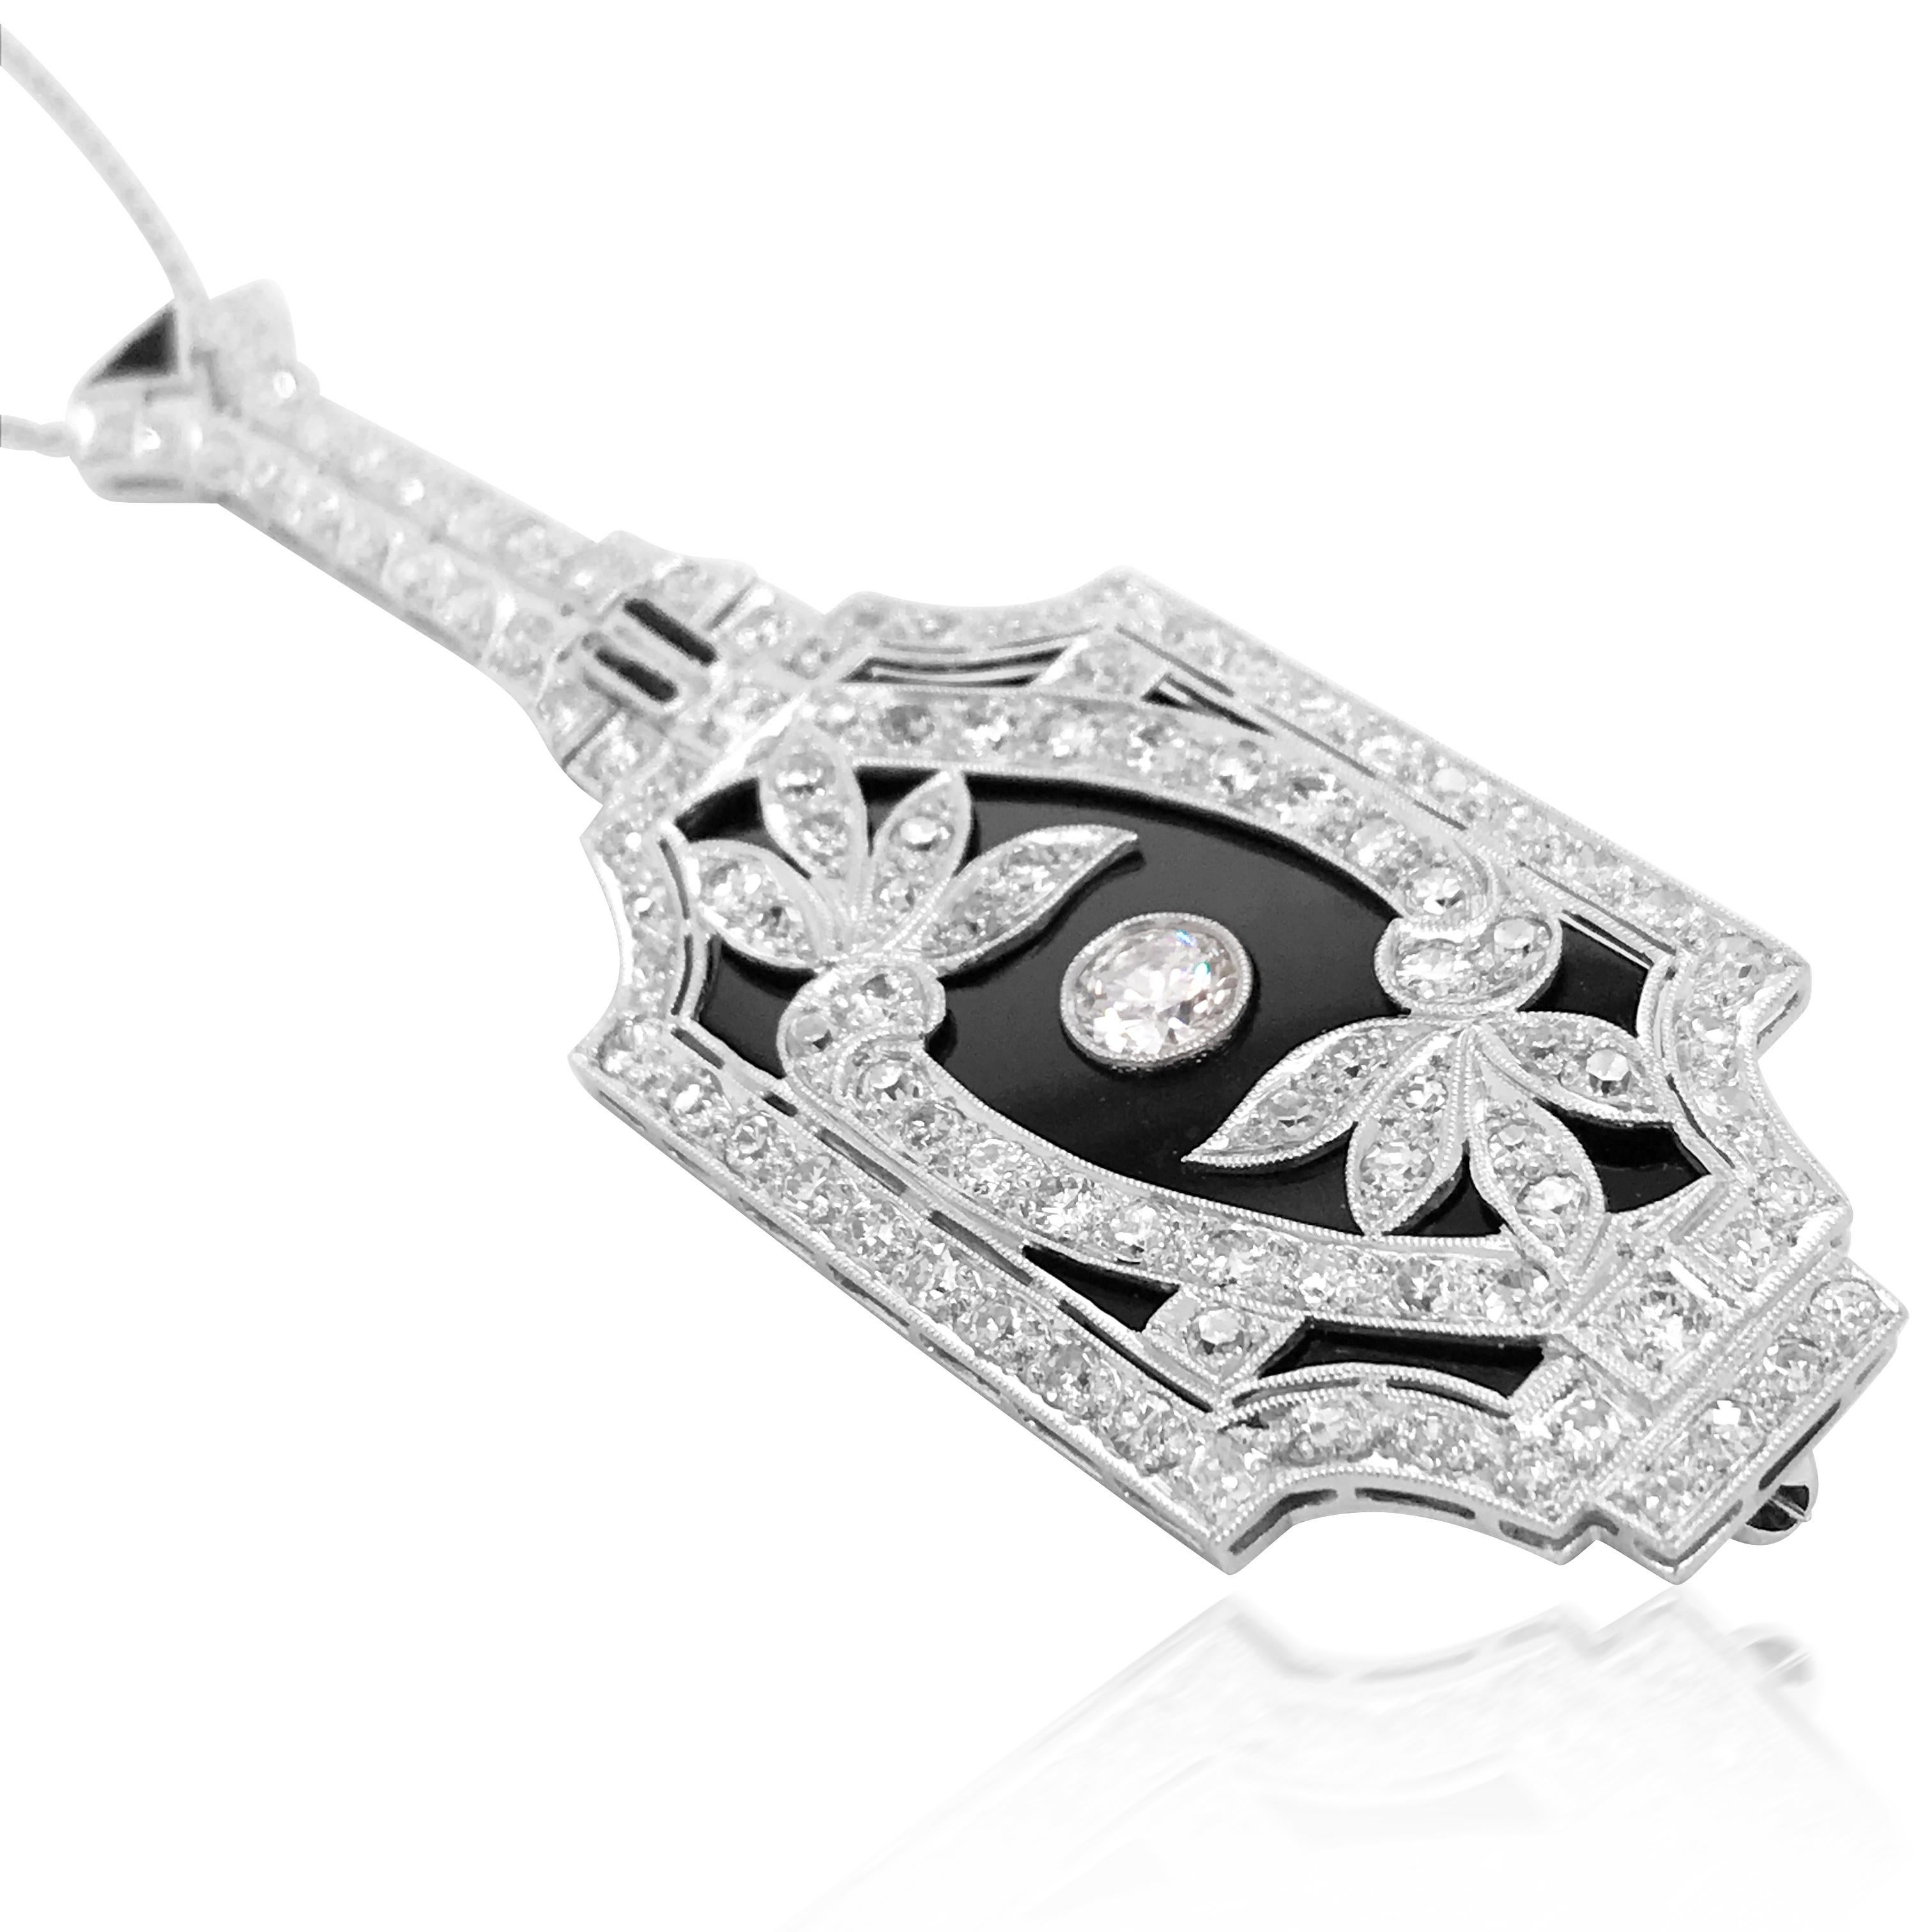 This exquisite diamond and onyx pendant is rendered in solid platinum. The pendant is shaped like a musical instrument and is centered with a 0.5ct round diamond. The flowers composed of other diamonds weighing approx. 2ct in total are classic with